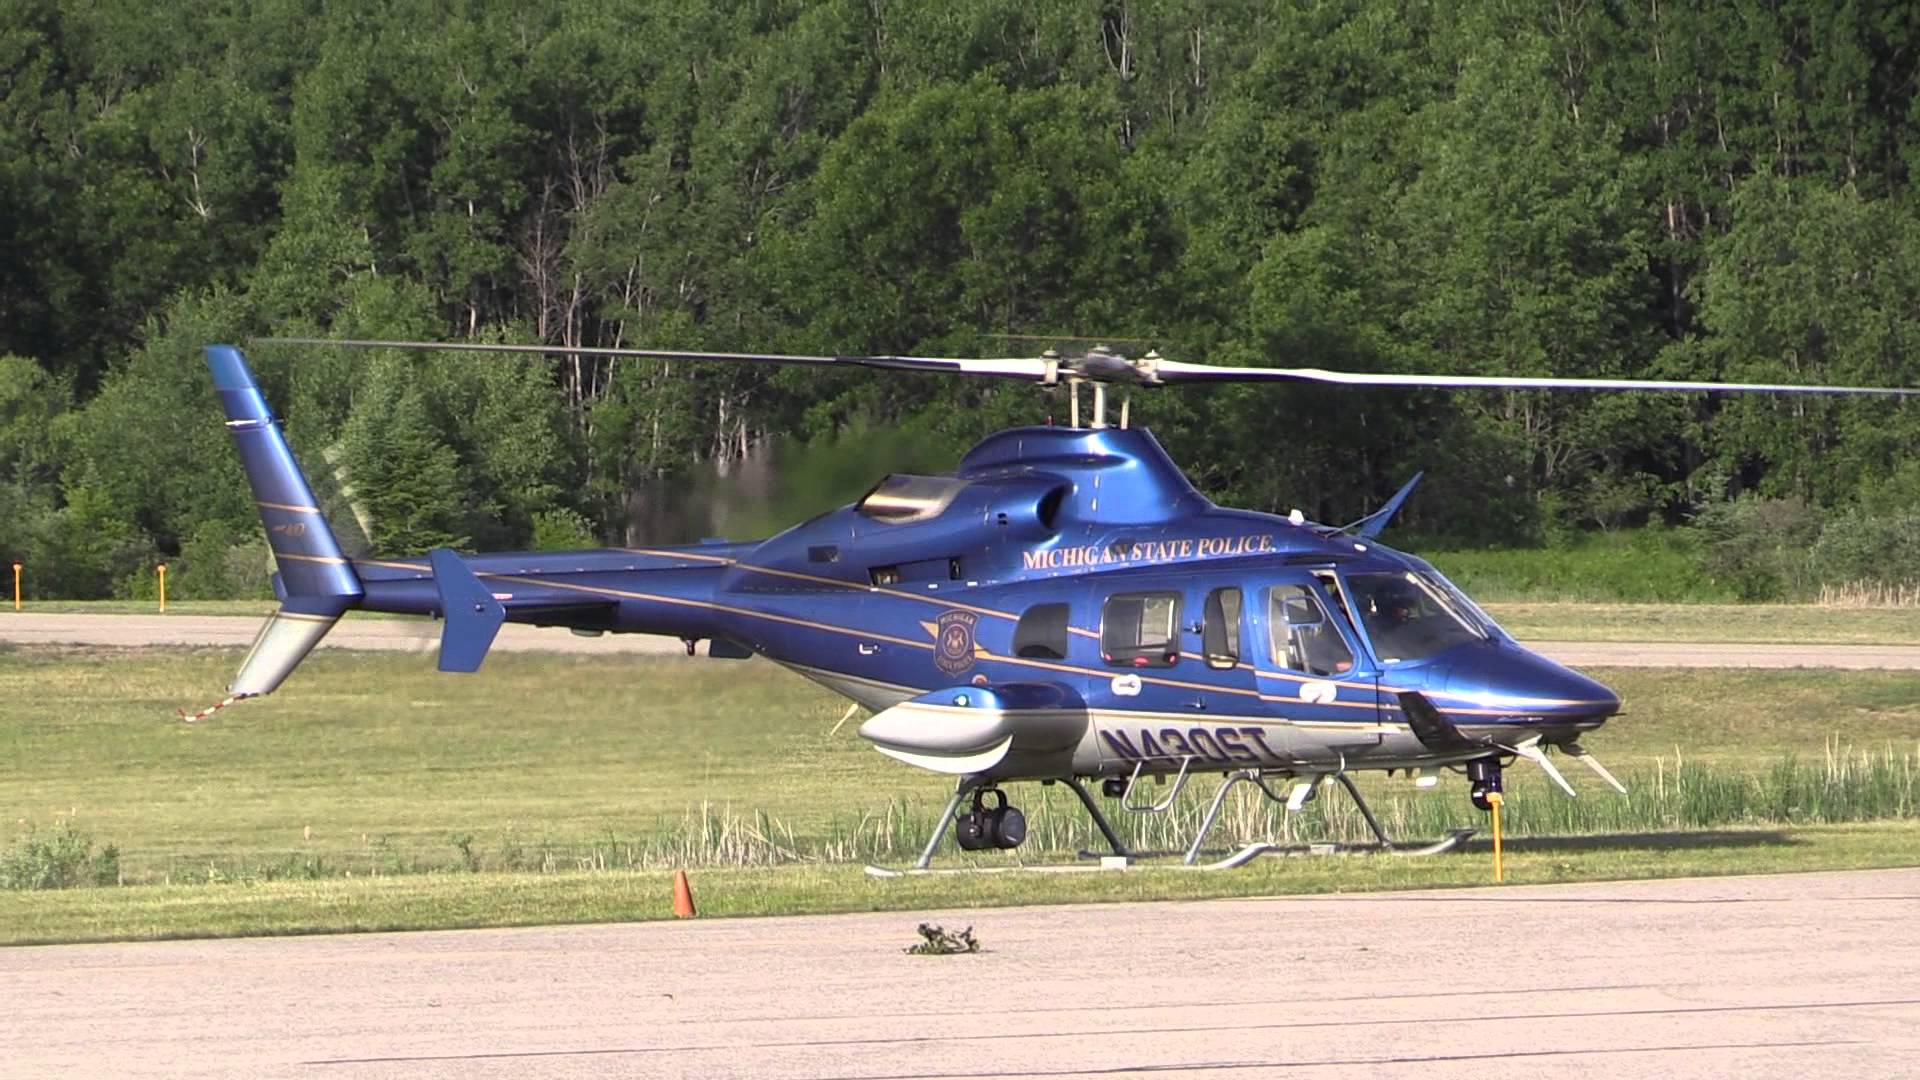 Michigan State Police Helicopter. Bell 430. Y31 6 21 2014 - YouTube